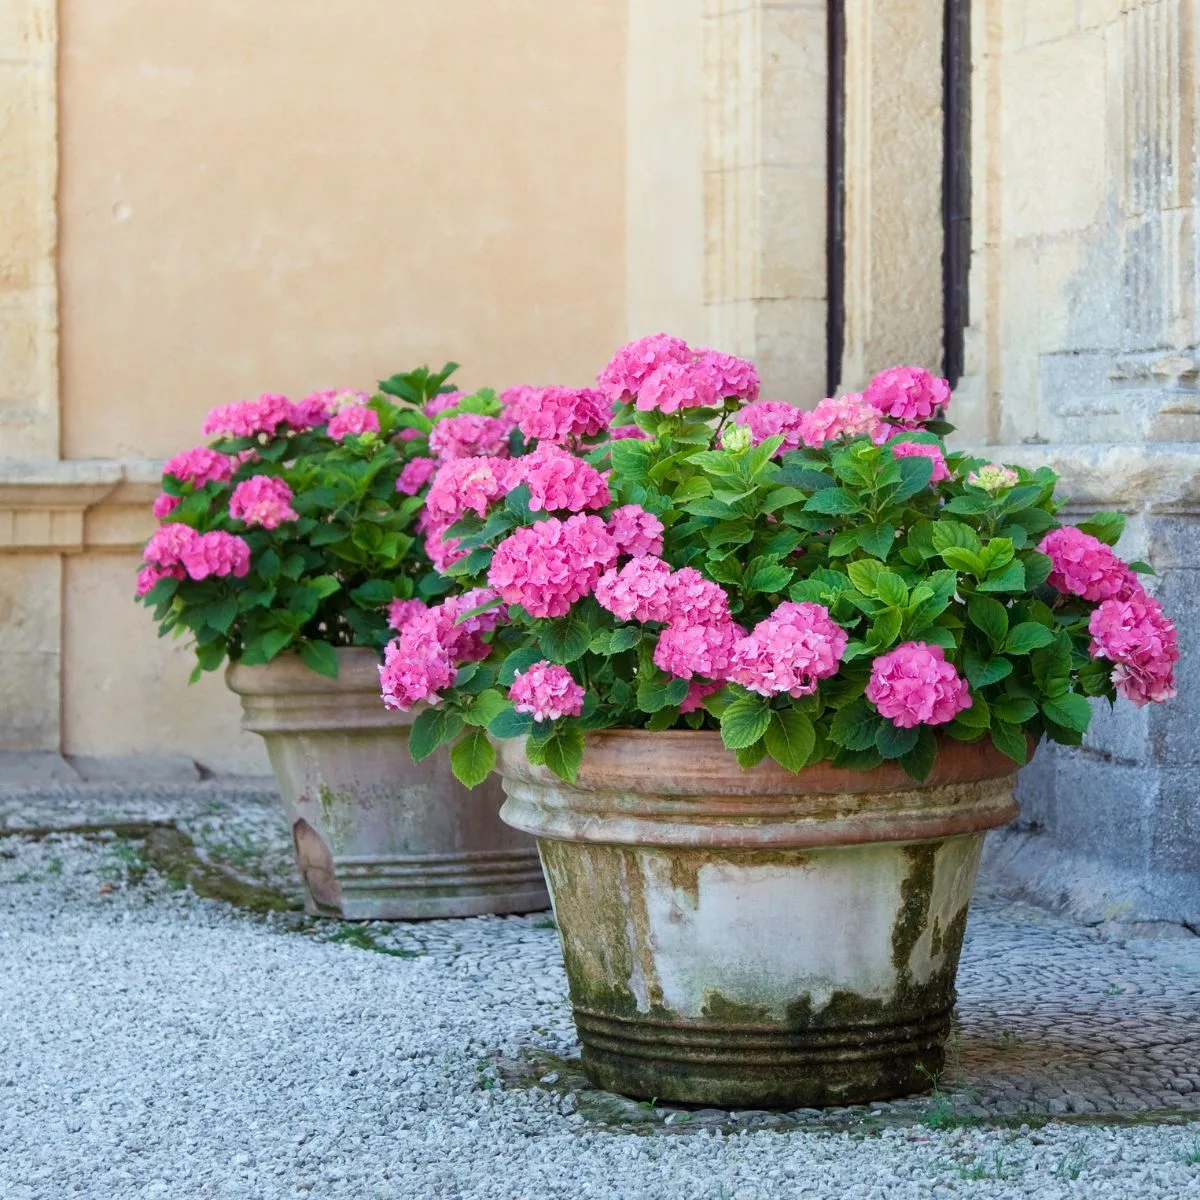 Potted pink hydrangeas.